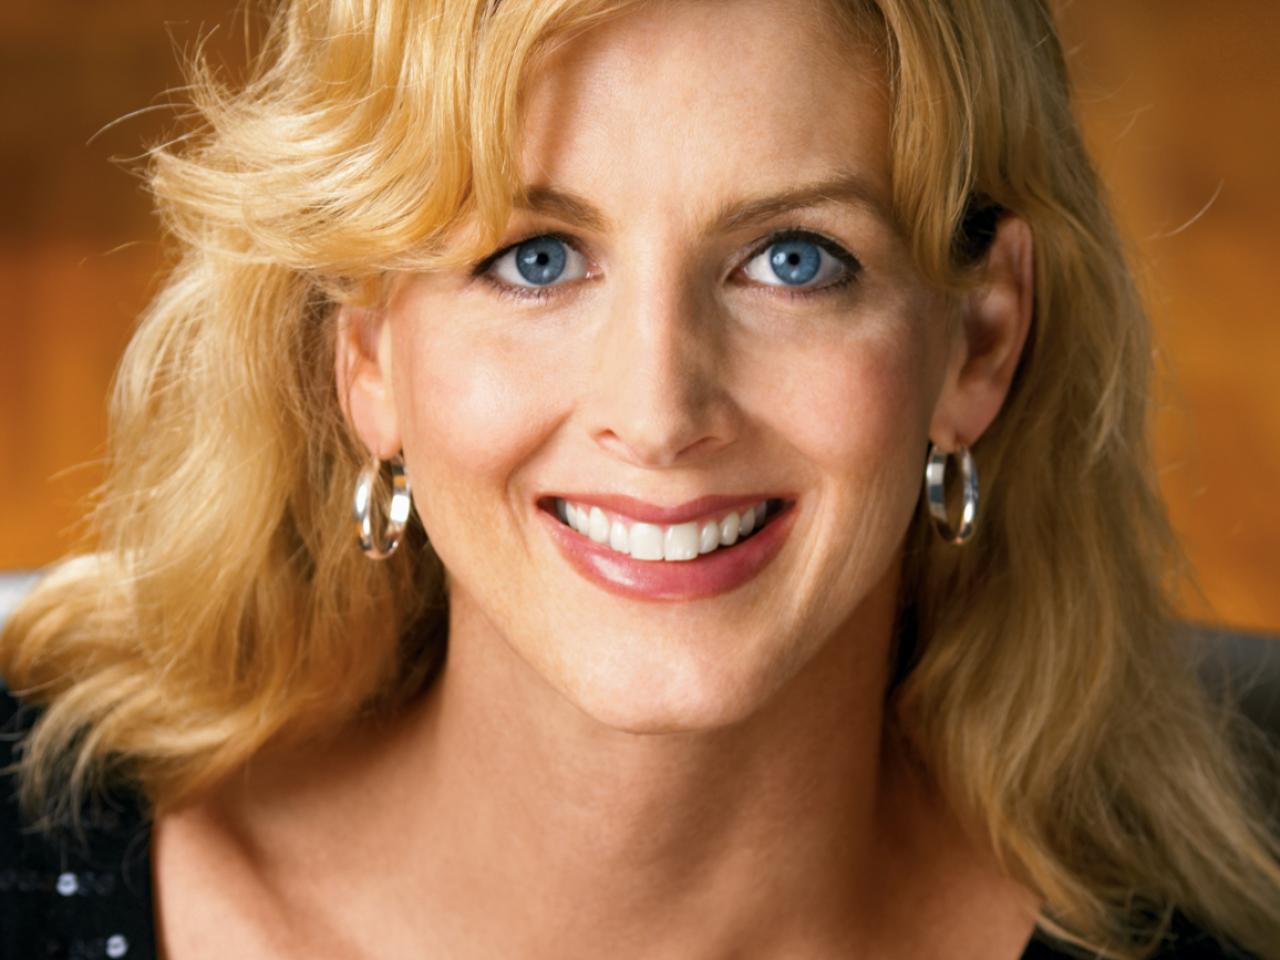 A headshot of New Day filmmaker Kimberly Reed. A trans woman with blonde hair and bright blue eyes smiles widely at the camera wearing hoop earrings. There is a plain orange wall blurred in the background.